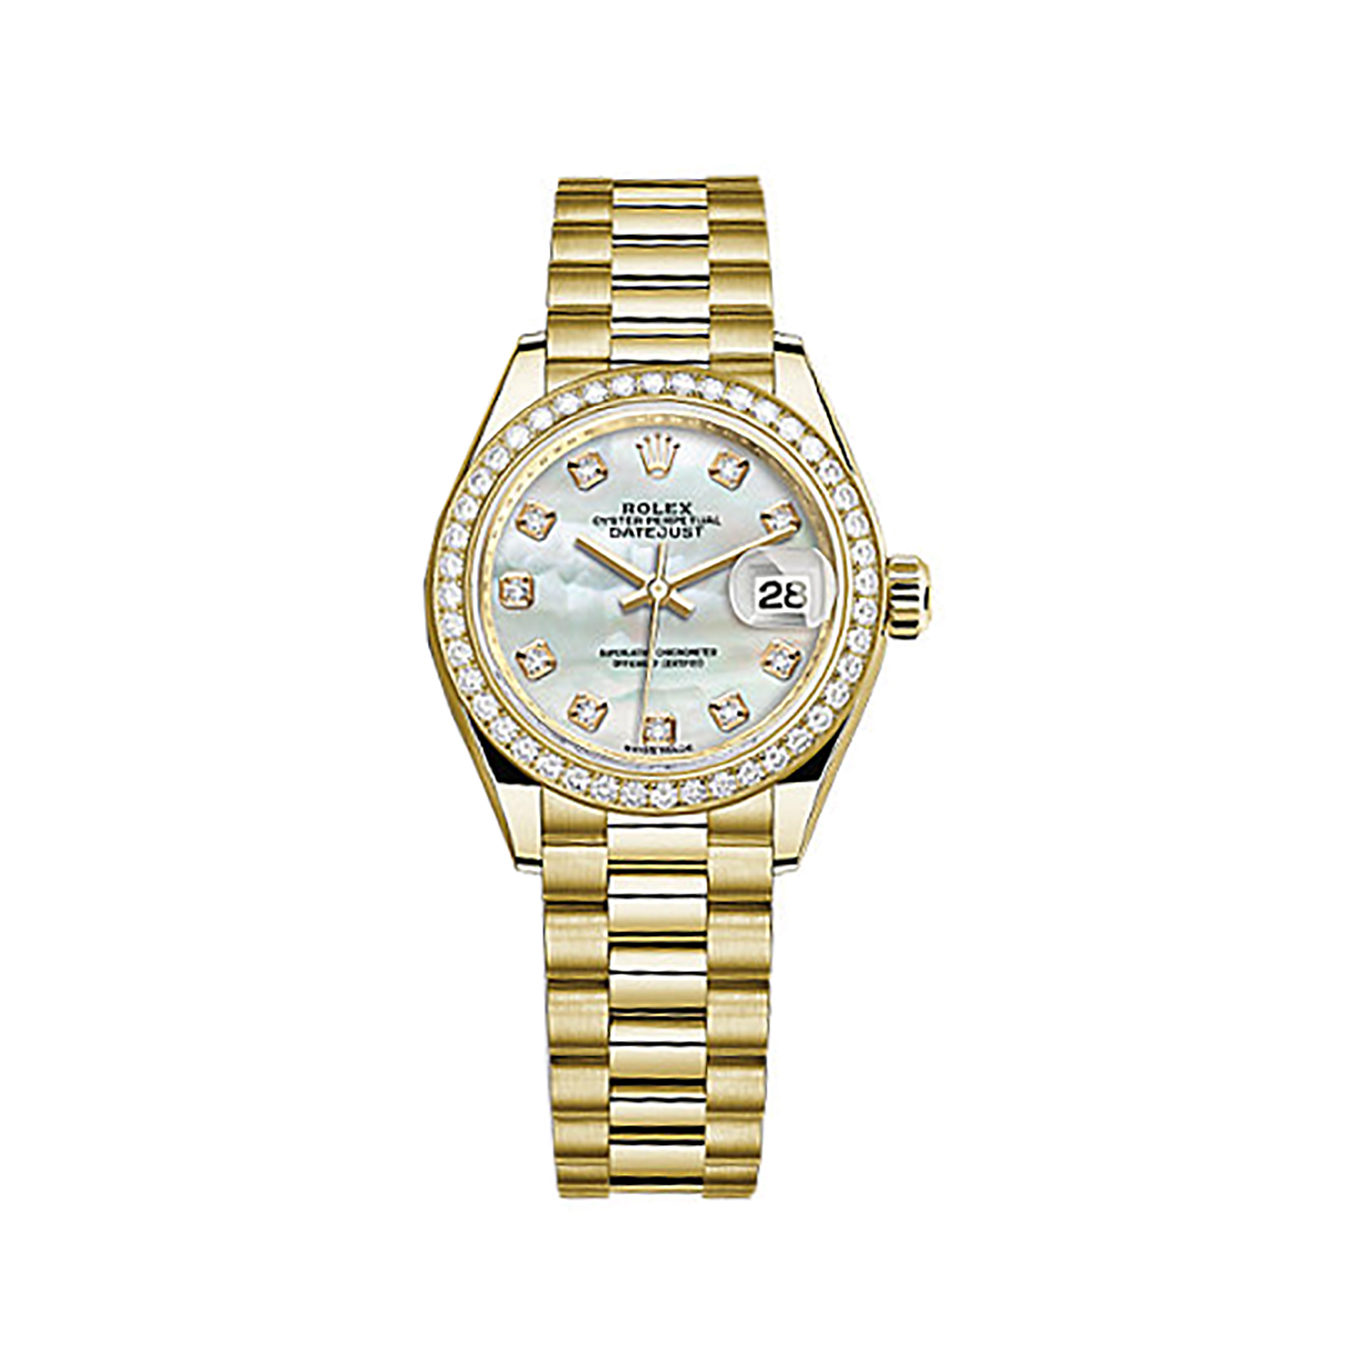 Lady-Datejust 28 279138RBR Gold & Diamonds Watch (White Mother-of-pearl Set with Diamonds)